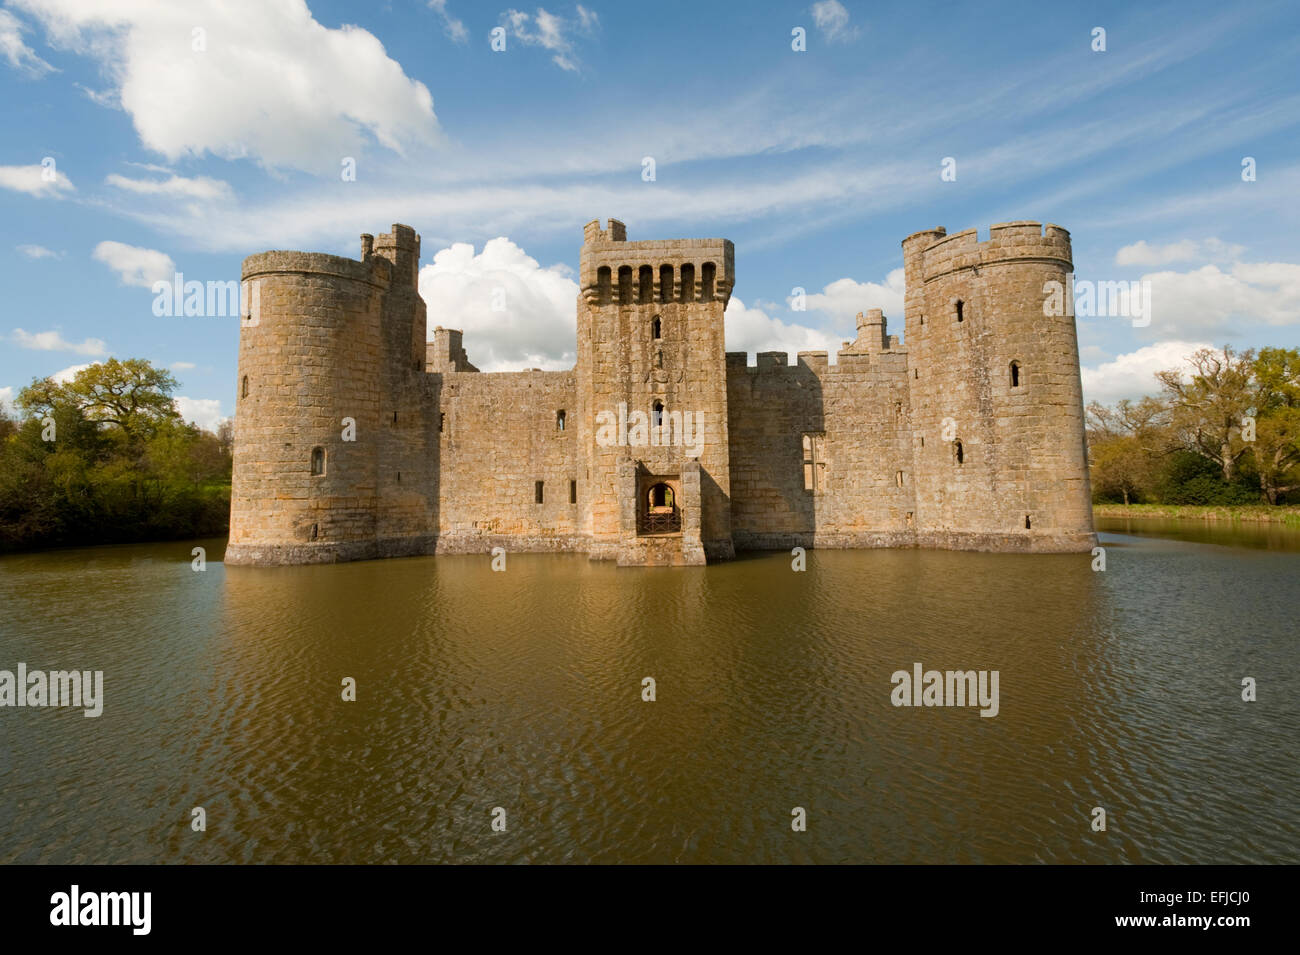 Bodiam castle near Robertsbridge East Sussex, showing the Moat and towers. Stock Photo